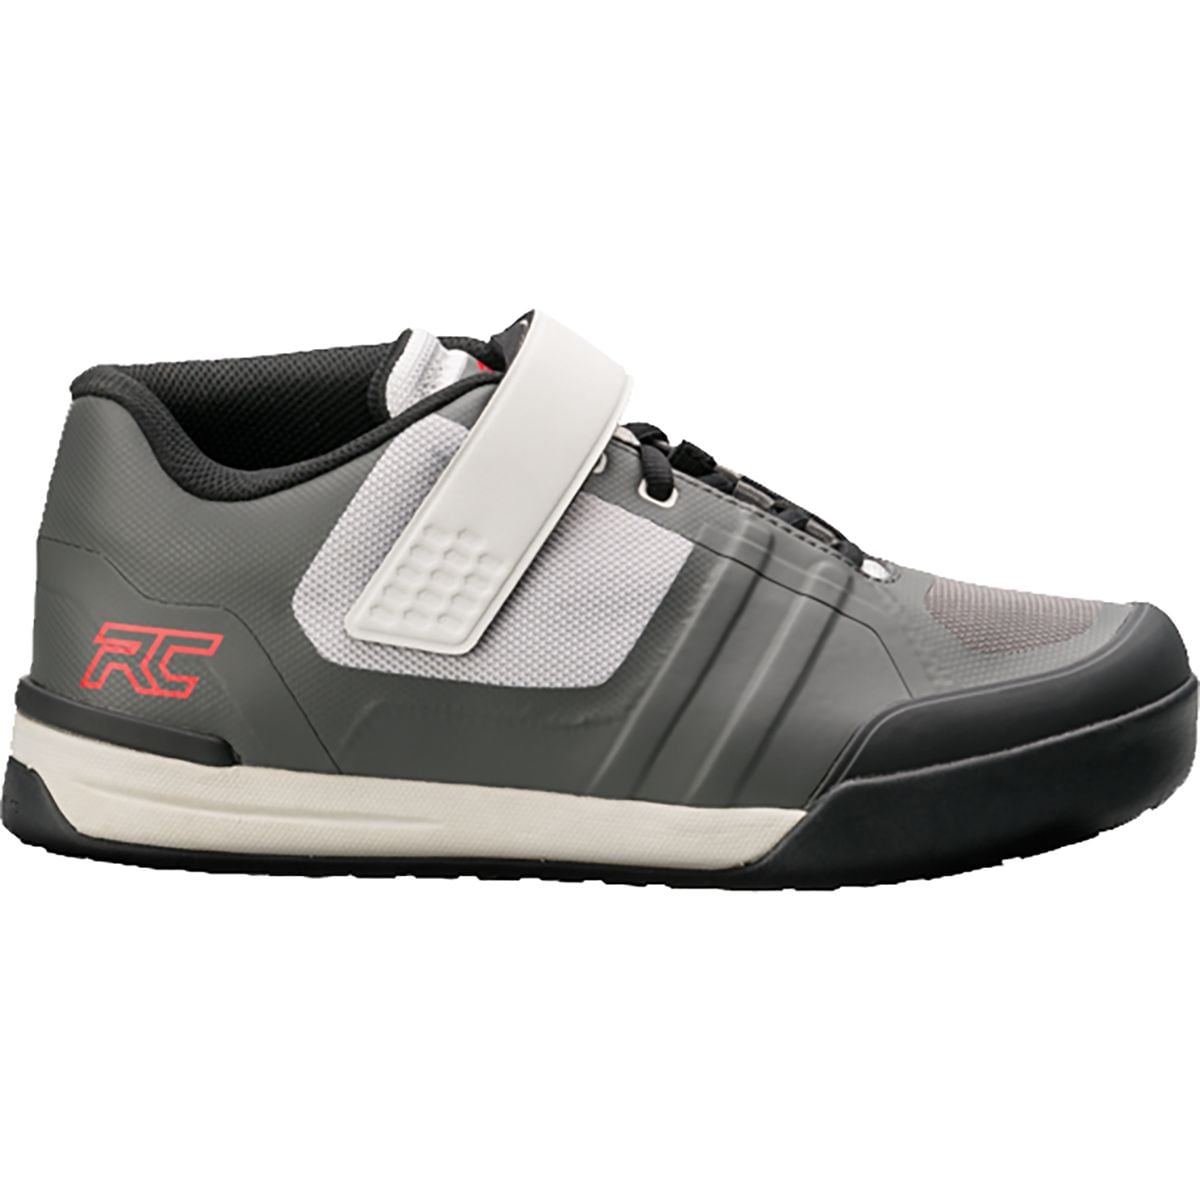 Ride Concepts Transition Cycling Shoe - Men's